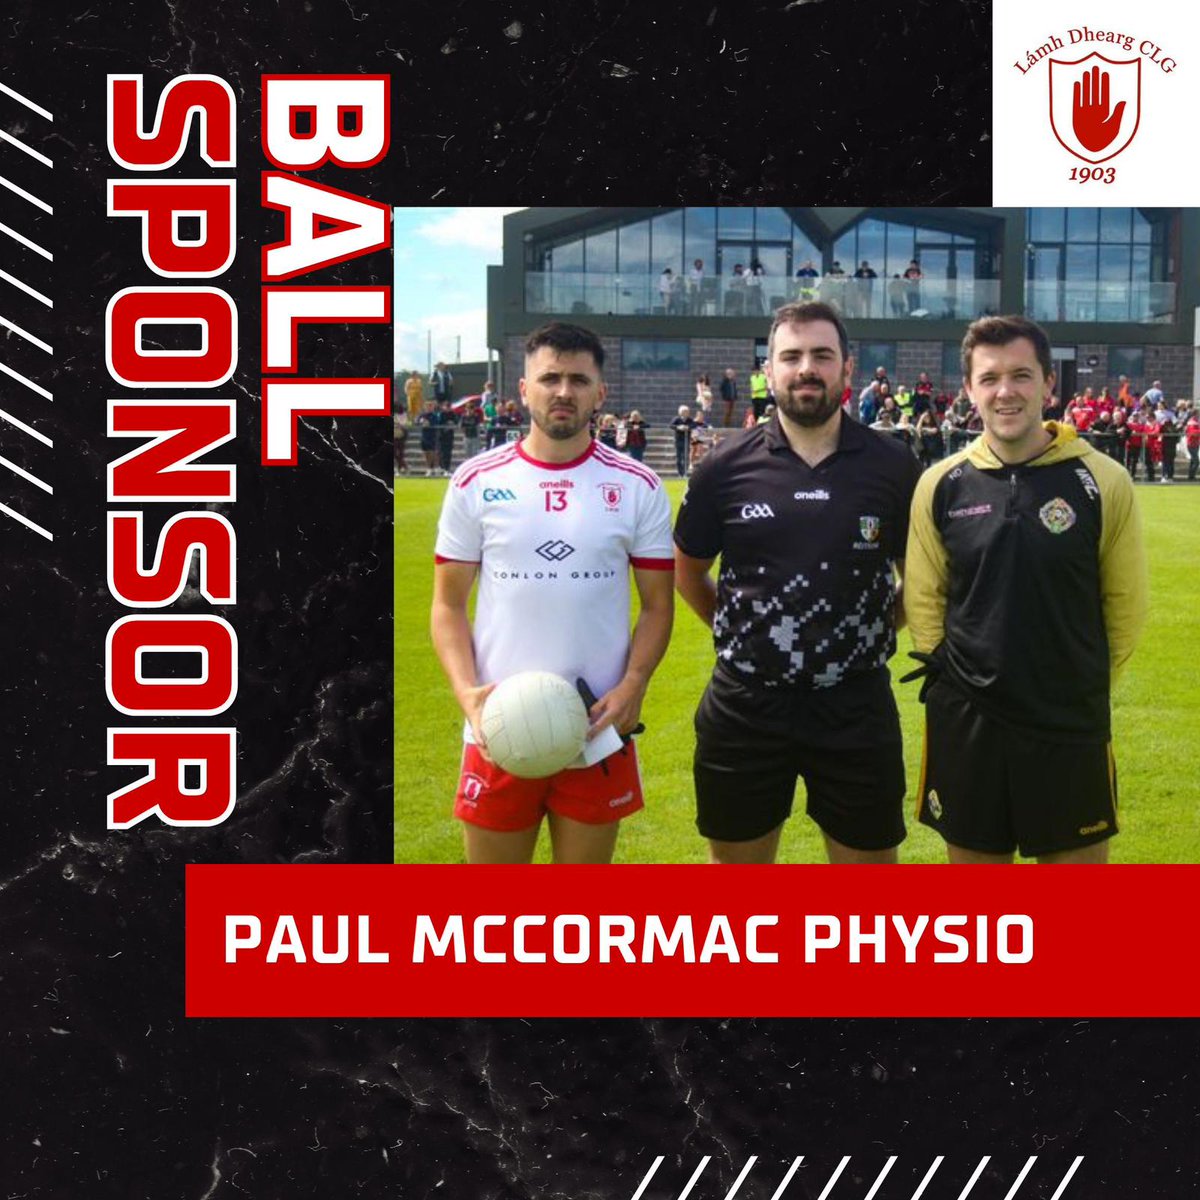 Many thanks to Paul McCormac Physio for kindly sponsoring the match football in Sunday’s Northern Switchgear County Senior Football Championship Group 2 game v Portglenone. (@PaulThePhysio)